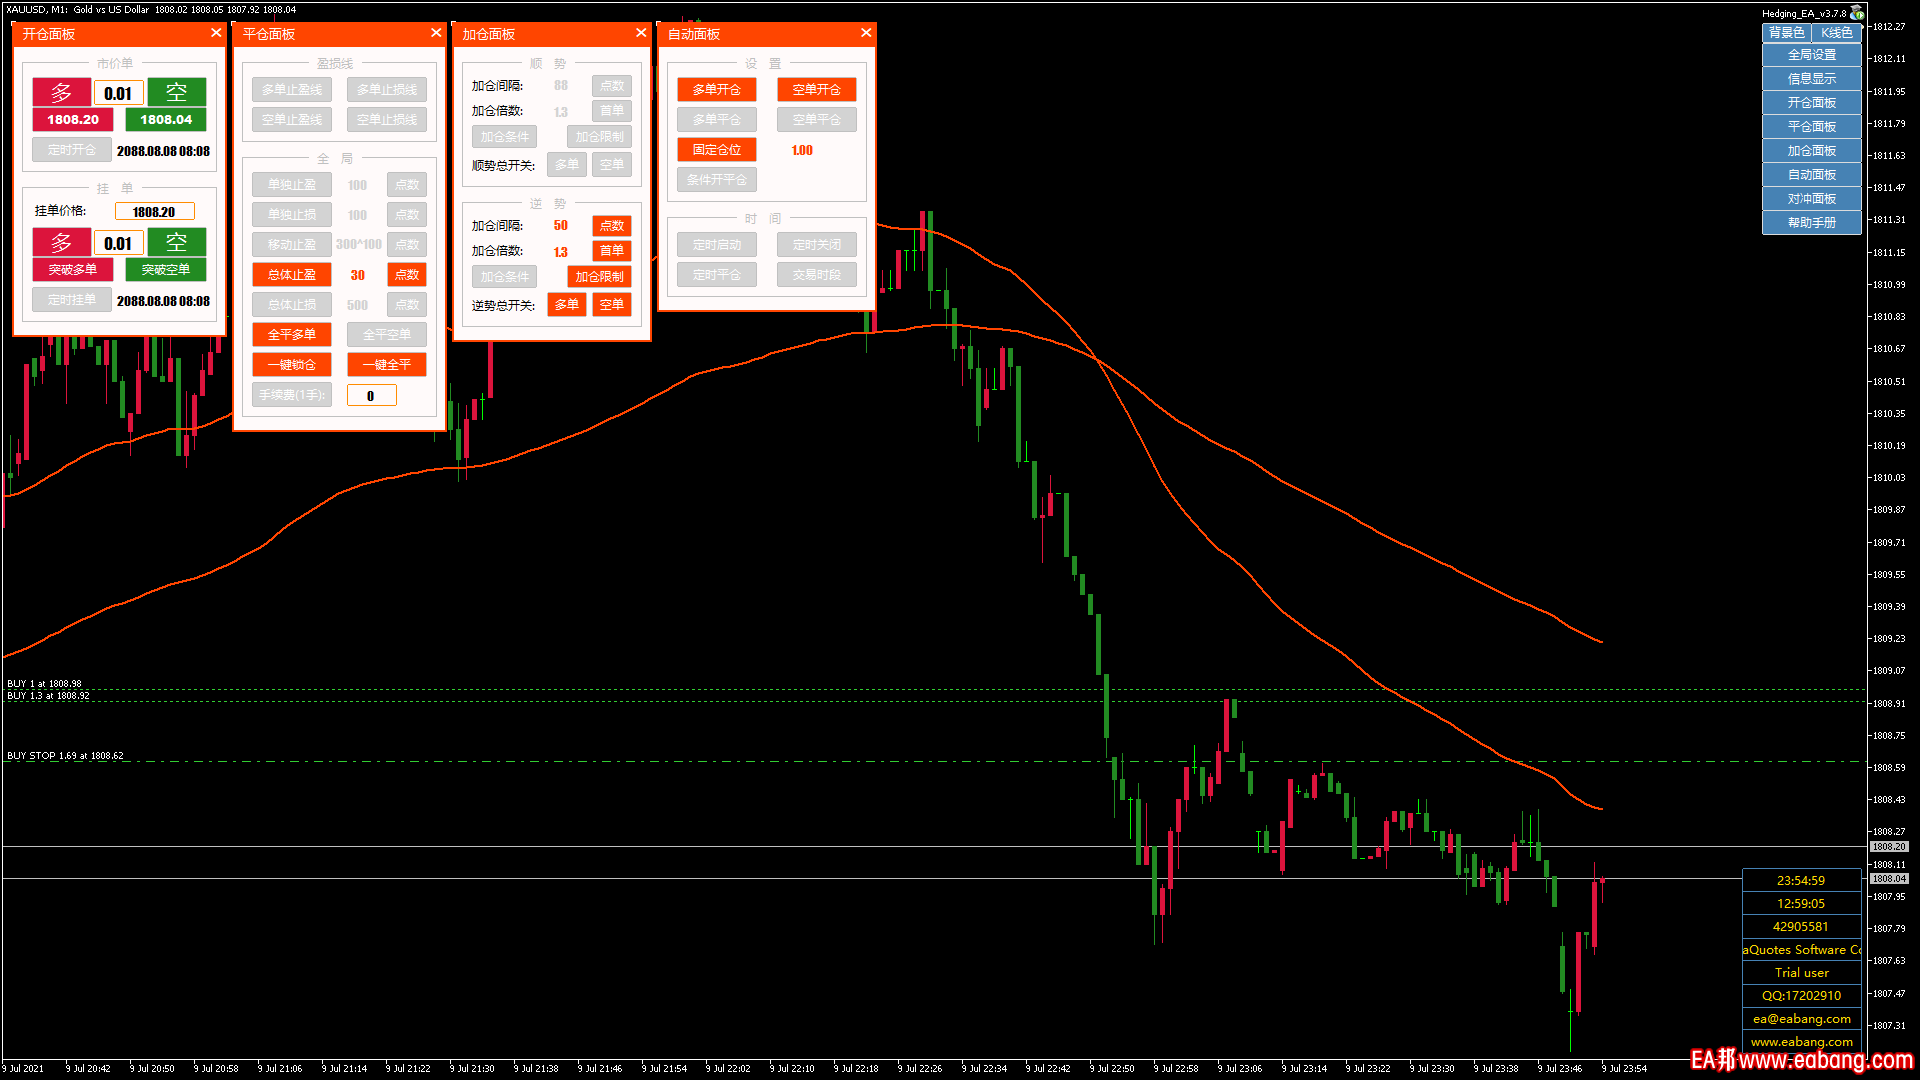 2021.7.10.12.59.5_XAUUSD_平仓_ORDER_TYPE_SELL_12.23_1234.56_652141.png